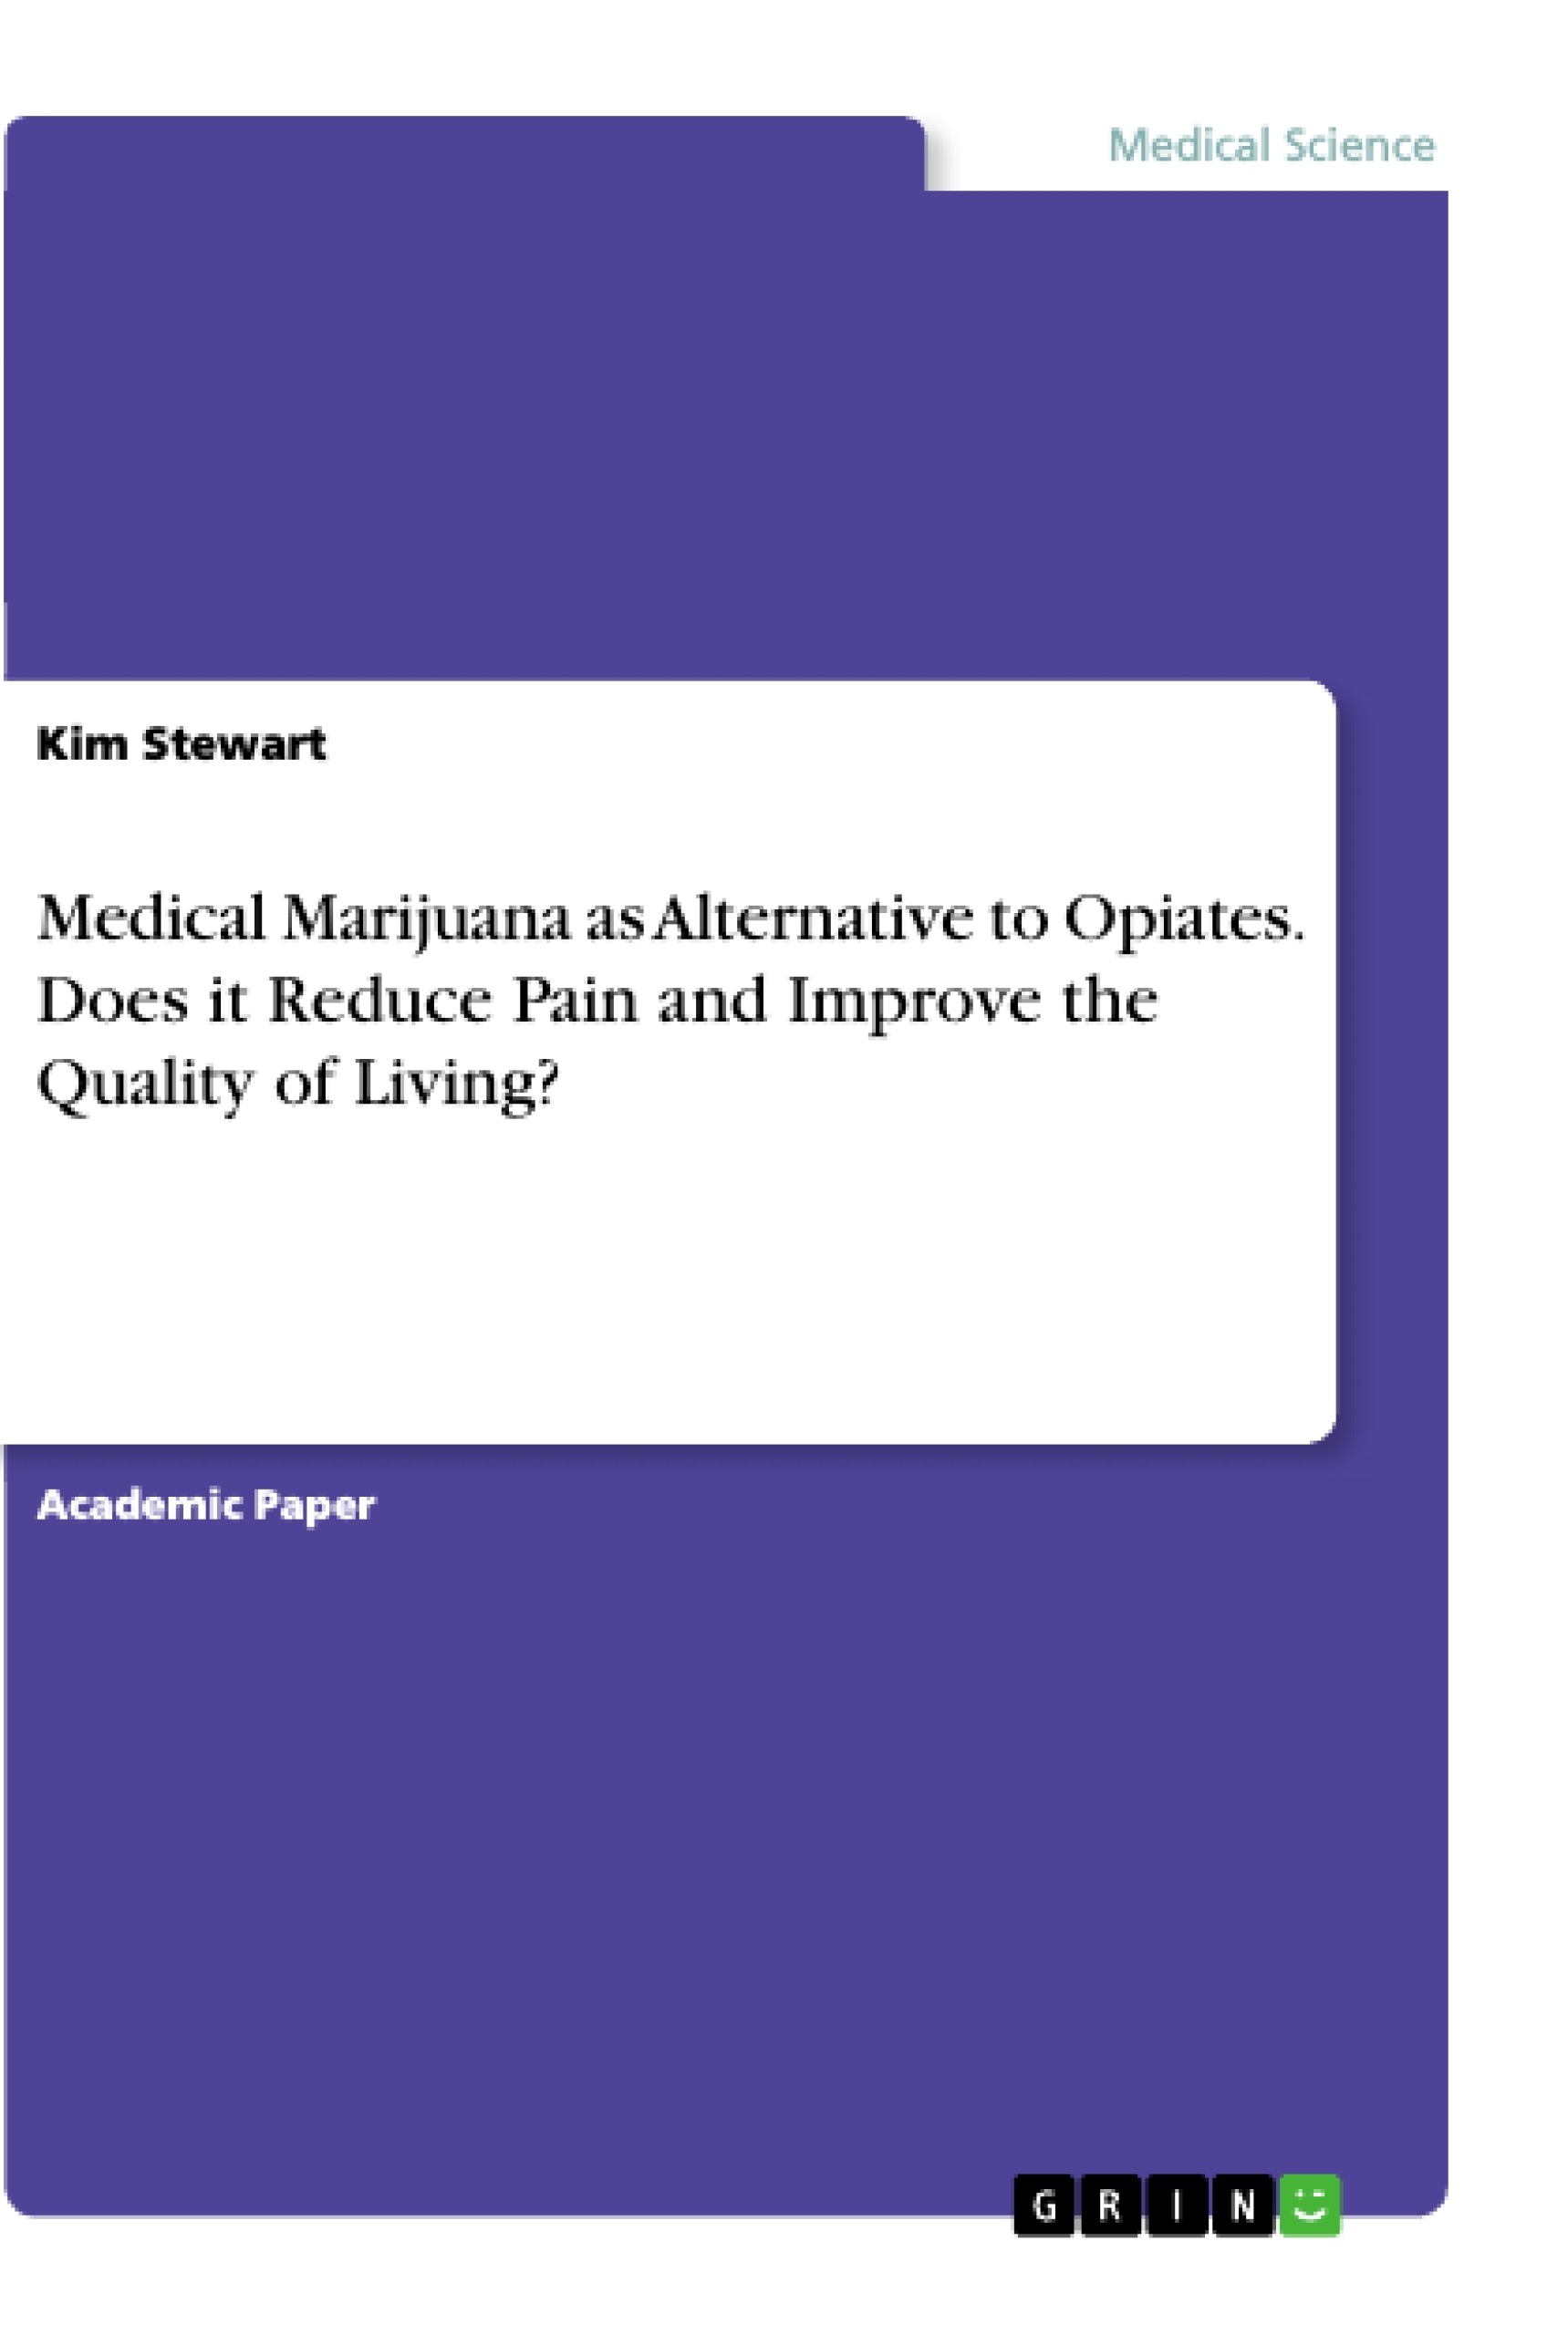 Título: Medical Marijuana as Alternative to Opiates. Does it Reduce Pain and Improve the Quality of Living?